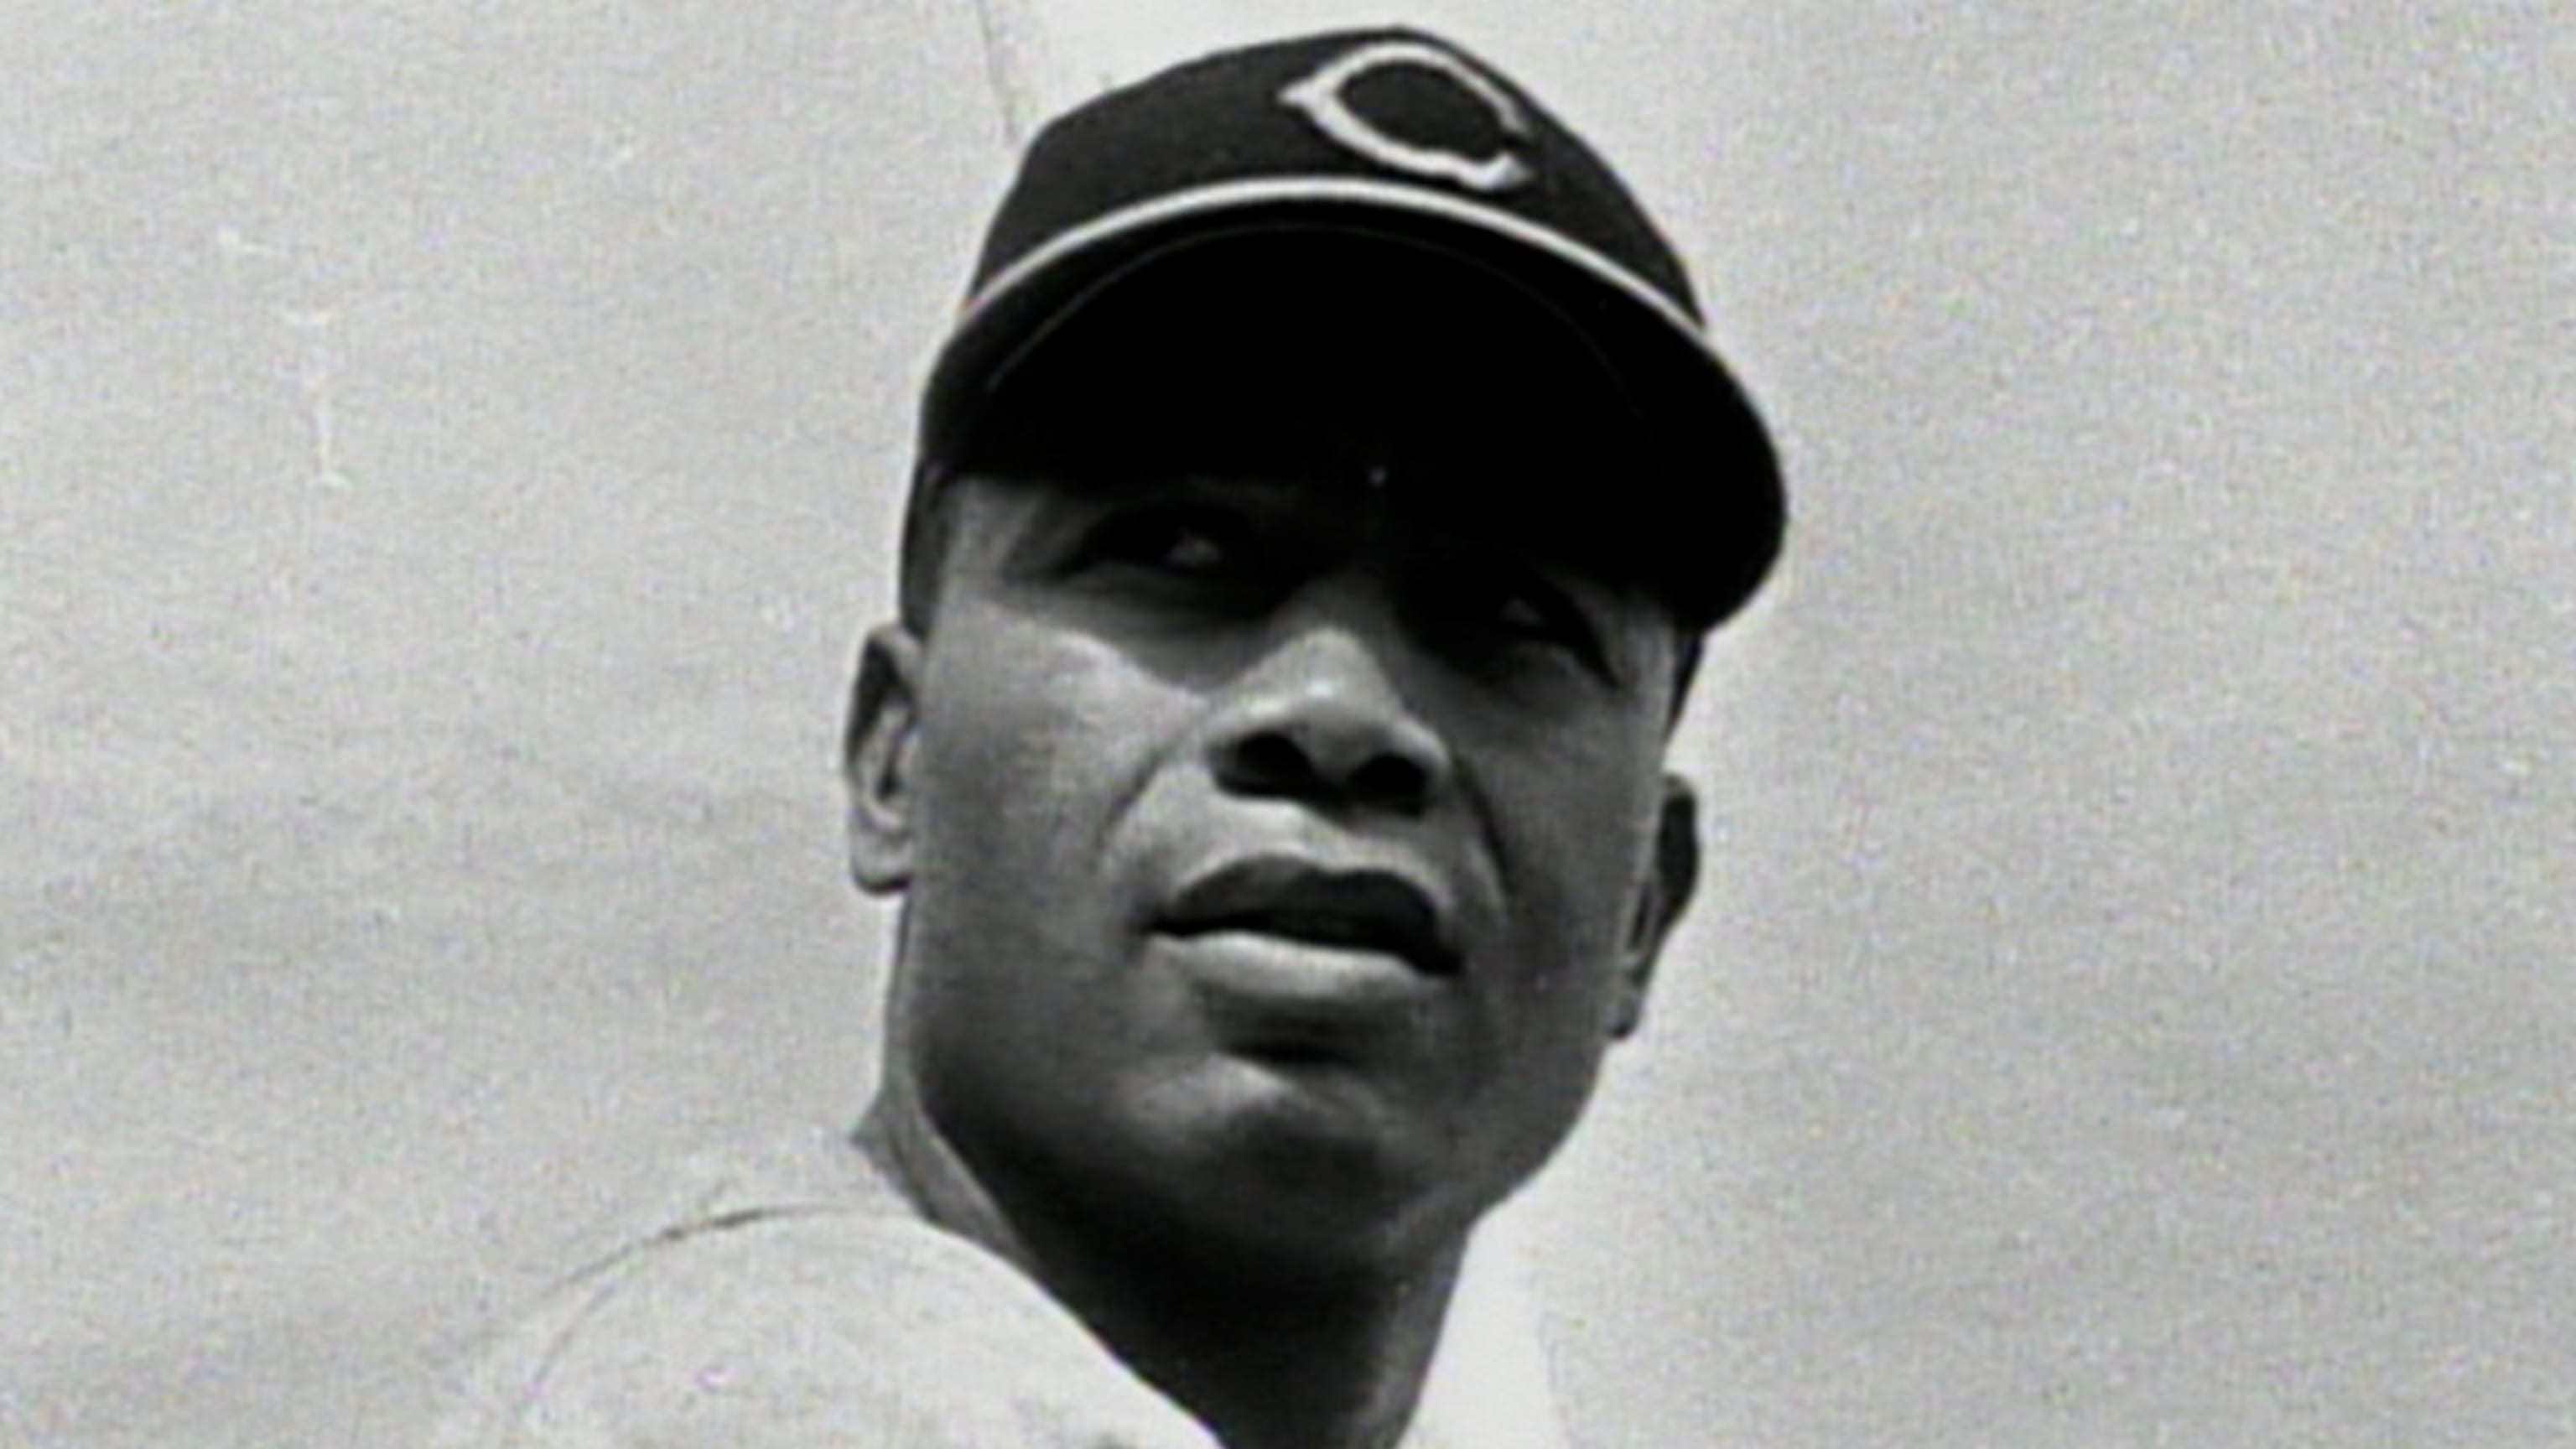 All Star: How Larry Doby Smashed the Color Barrier in Baseball